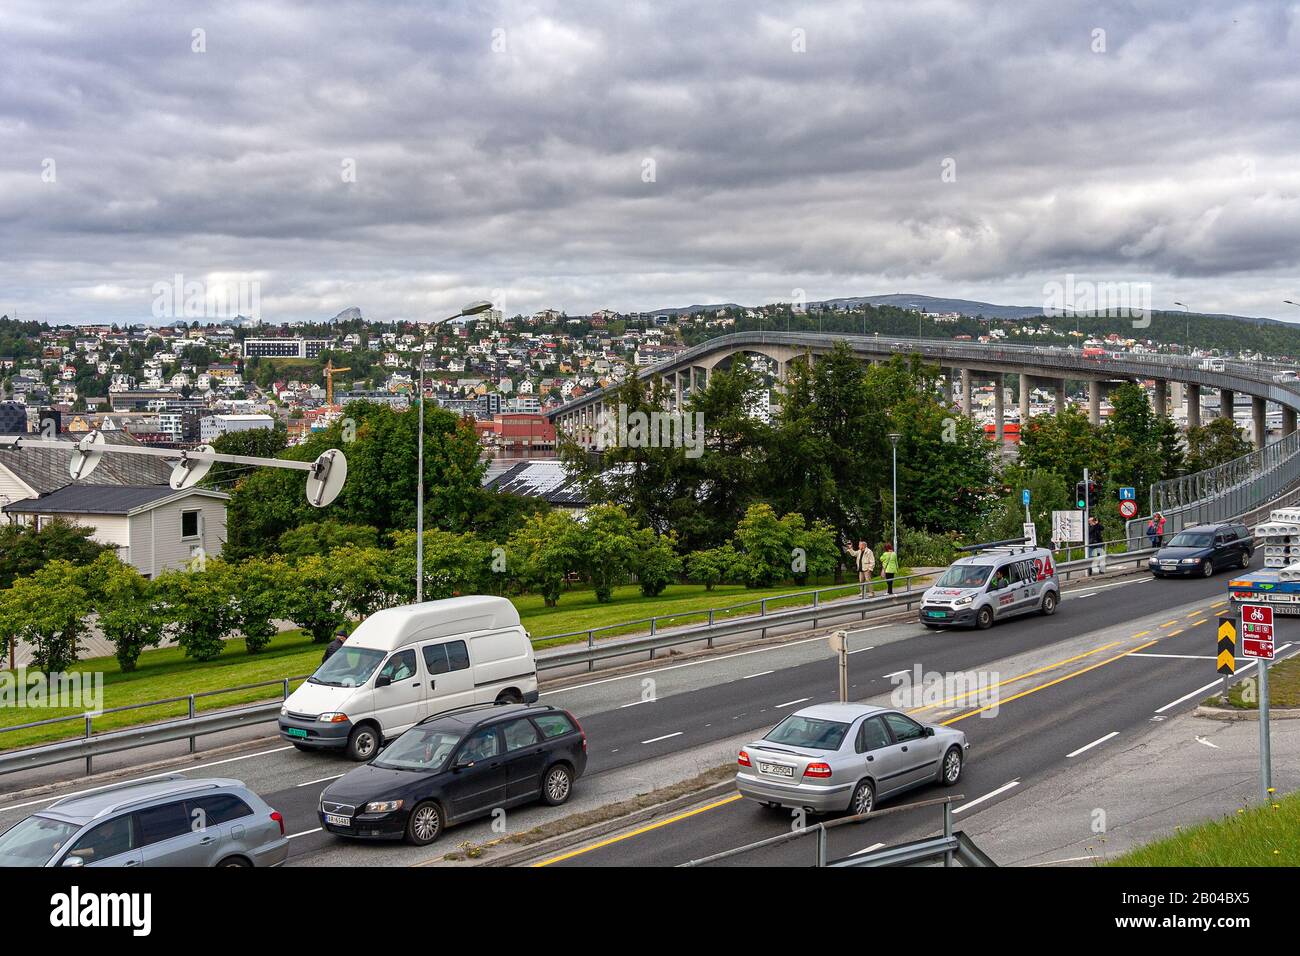 urban landscape of the city of Tromso in Norway. Busy street with bridge leading to the city center. Tromsø, County of Troms og Finnmark, Norway Stock Photo